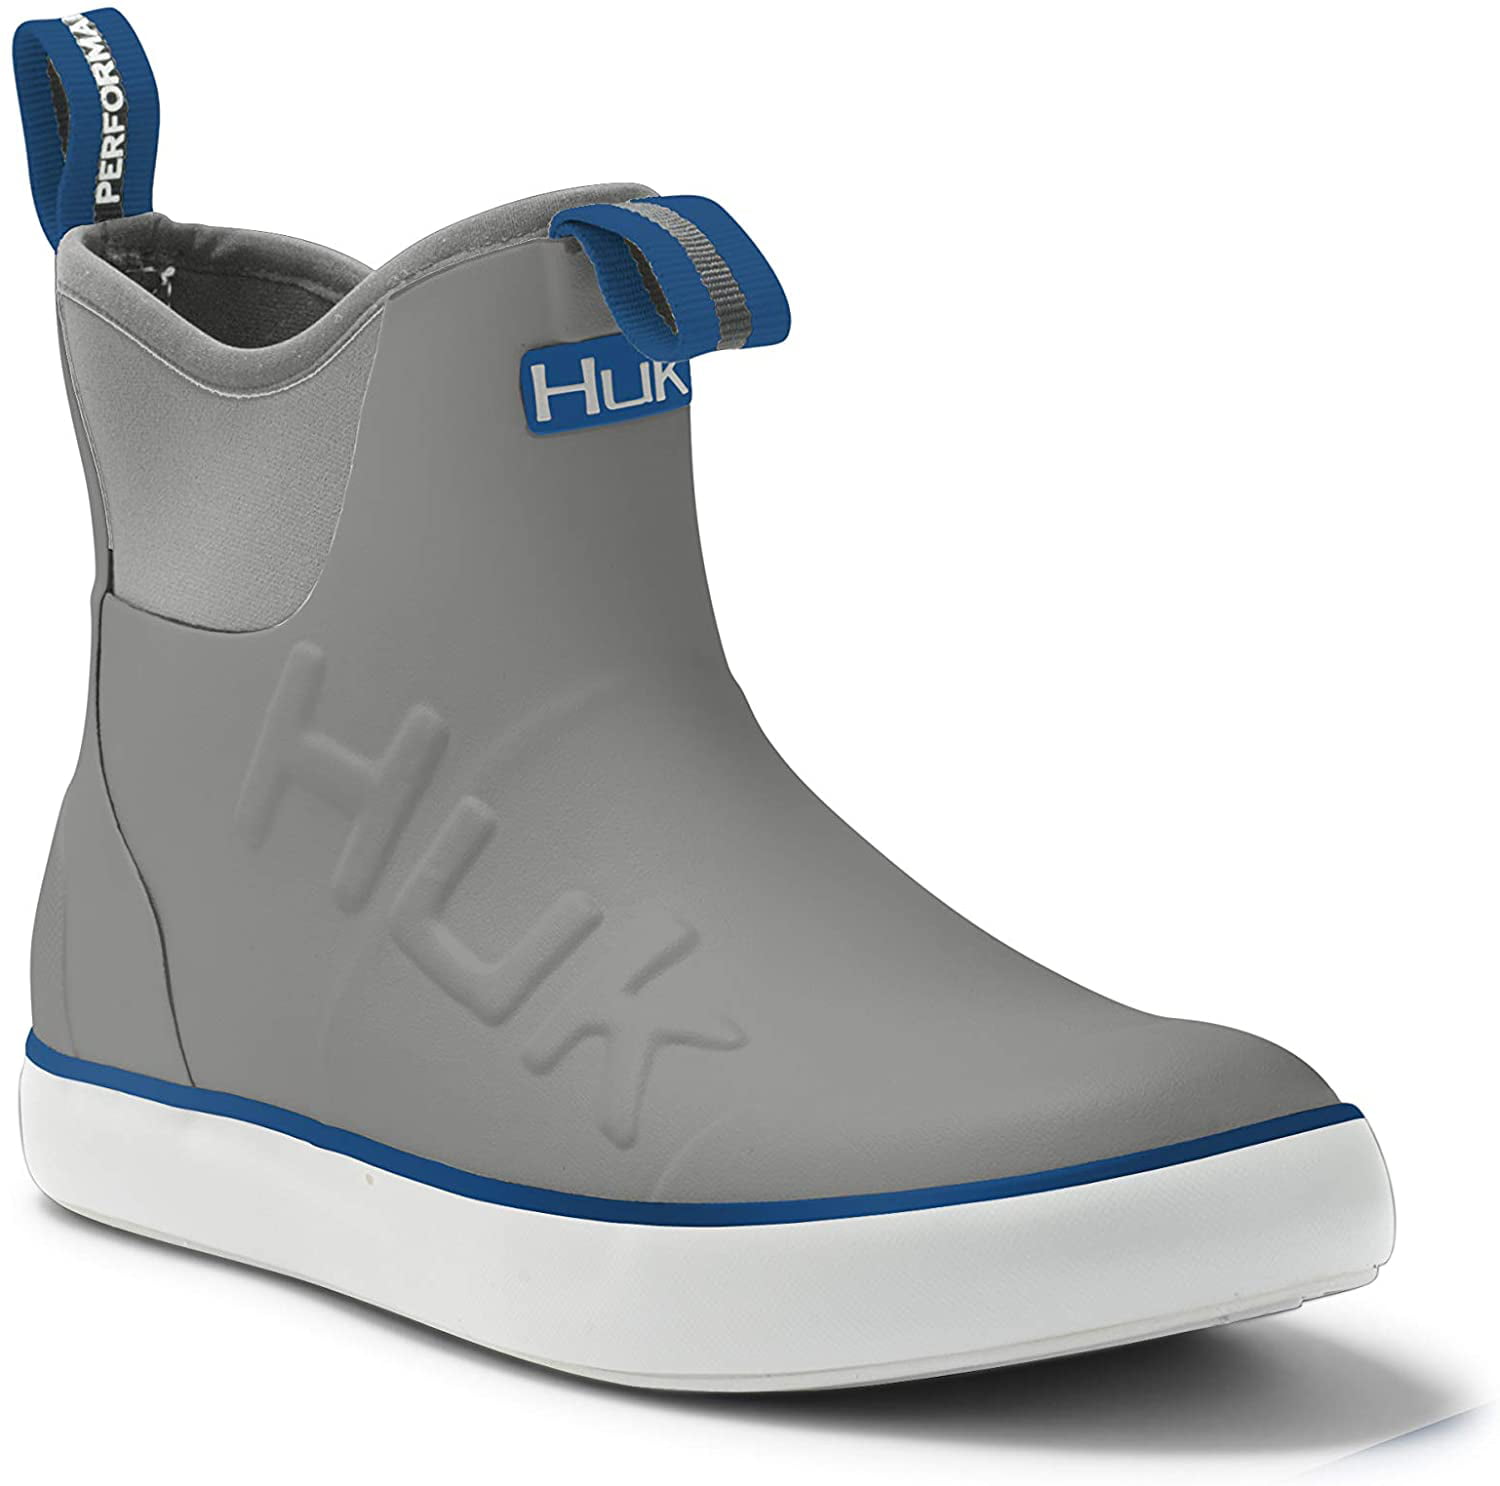 Huk Men's Rogue Wave Grey Size 7 High-Performance Fishing Ankle